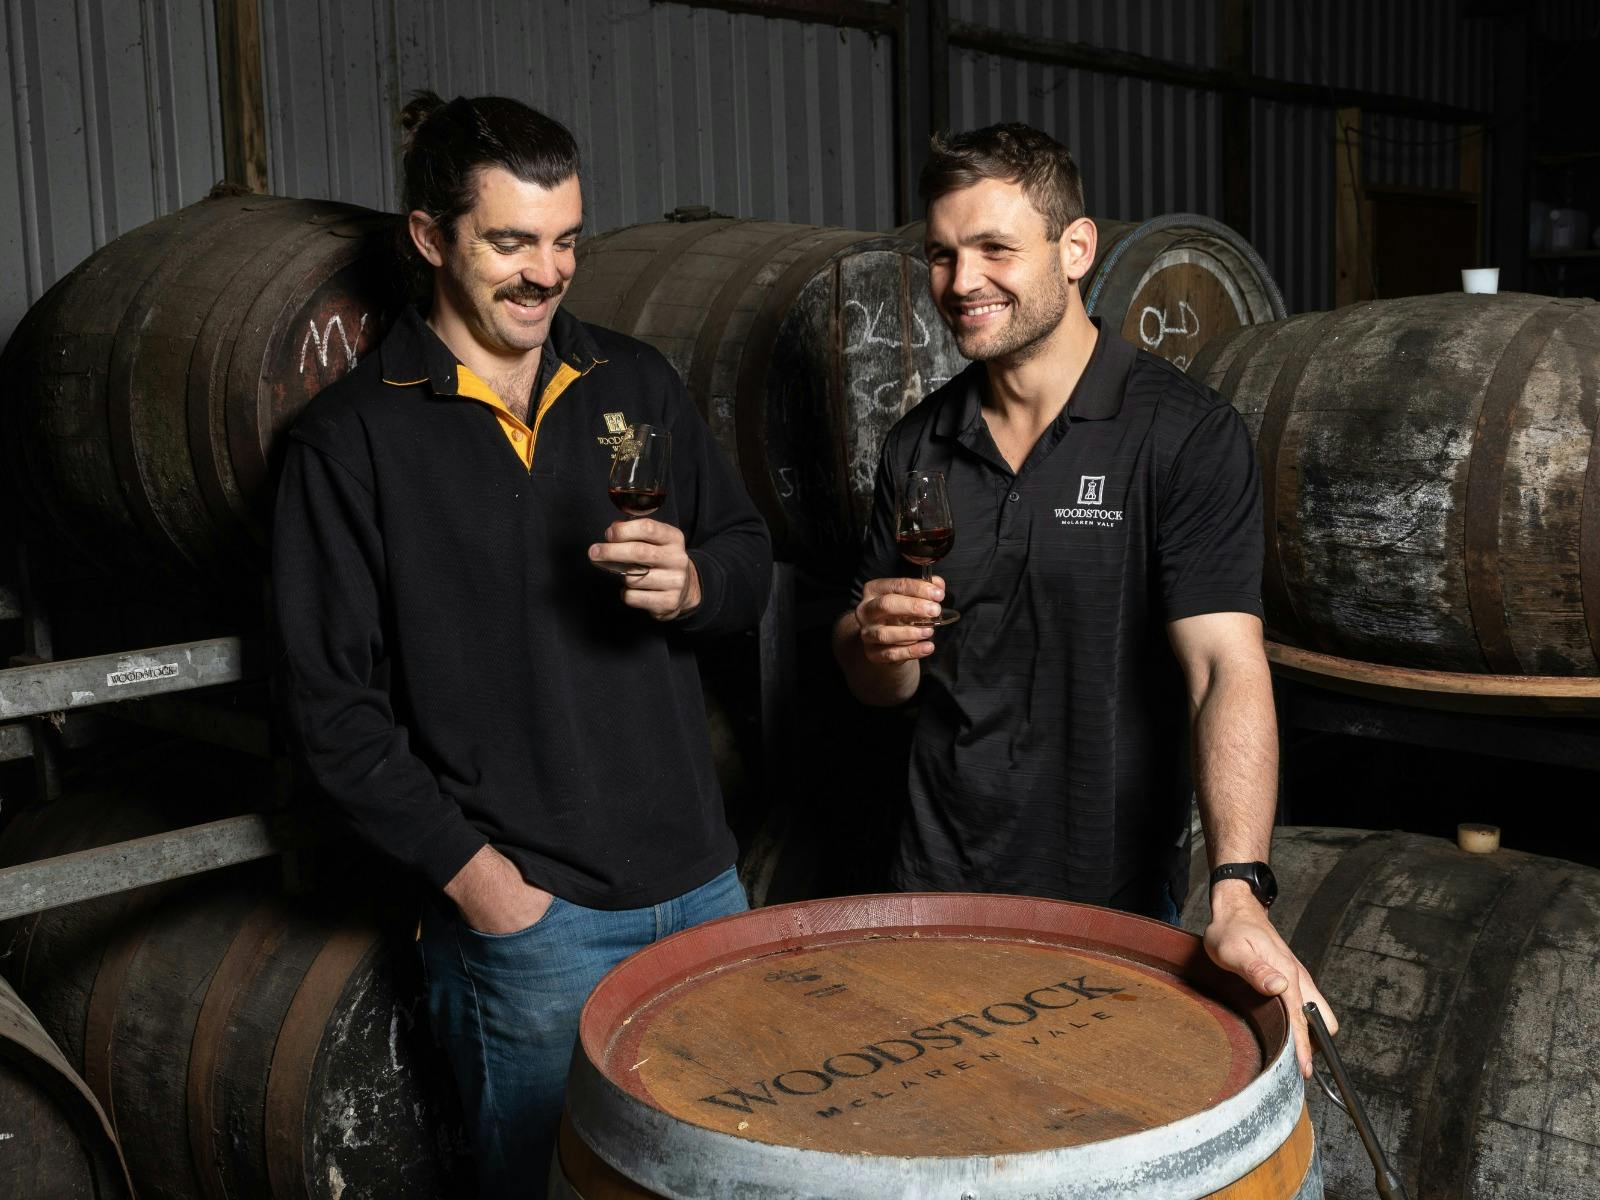 Max and Peter Collett in the Woodstock Wine fortified cellar